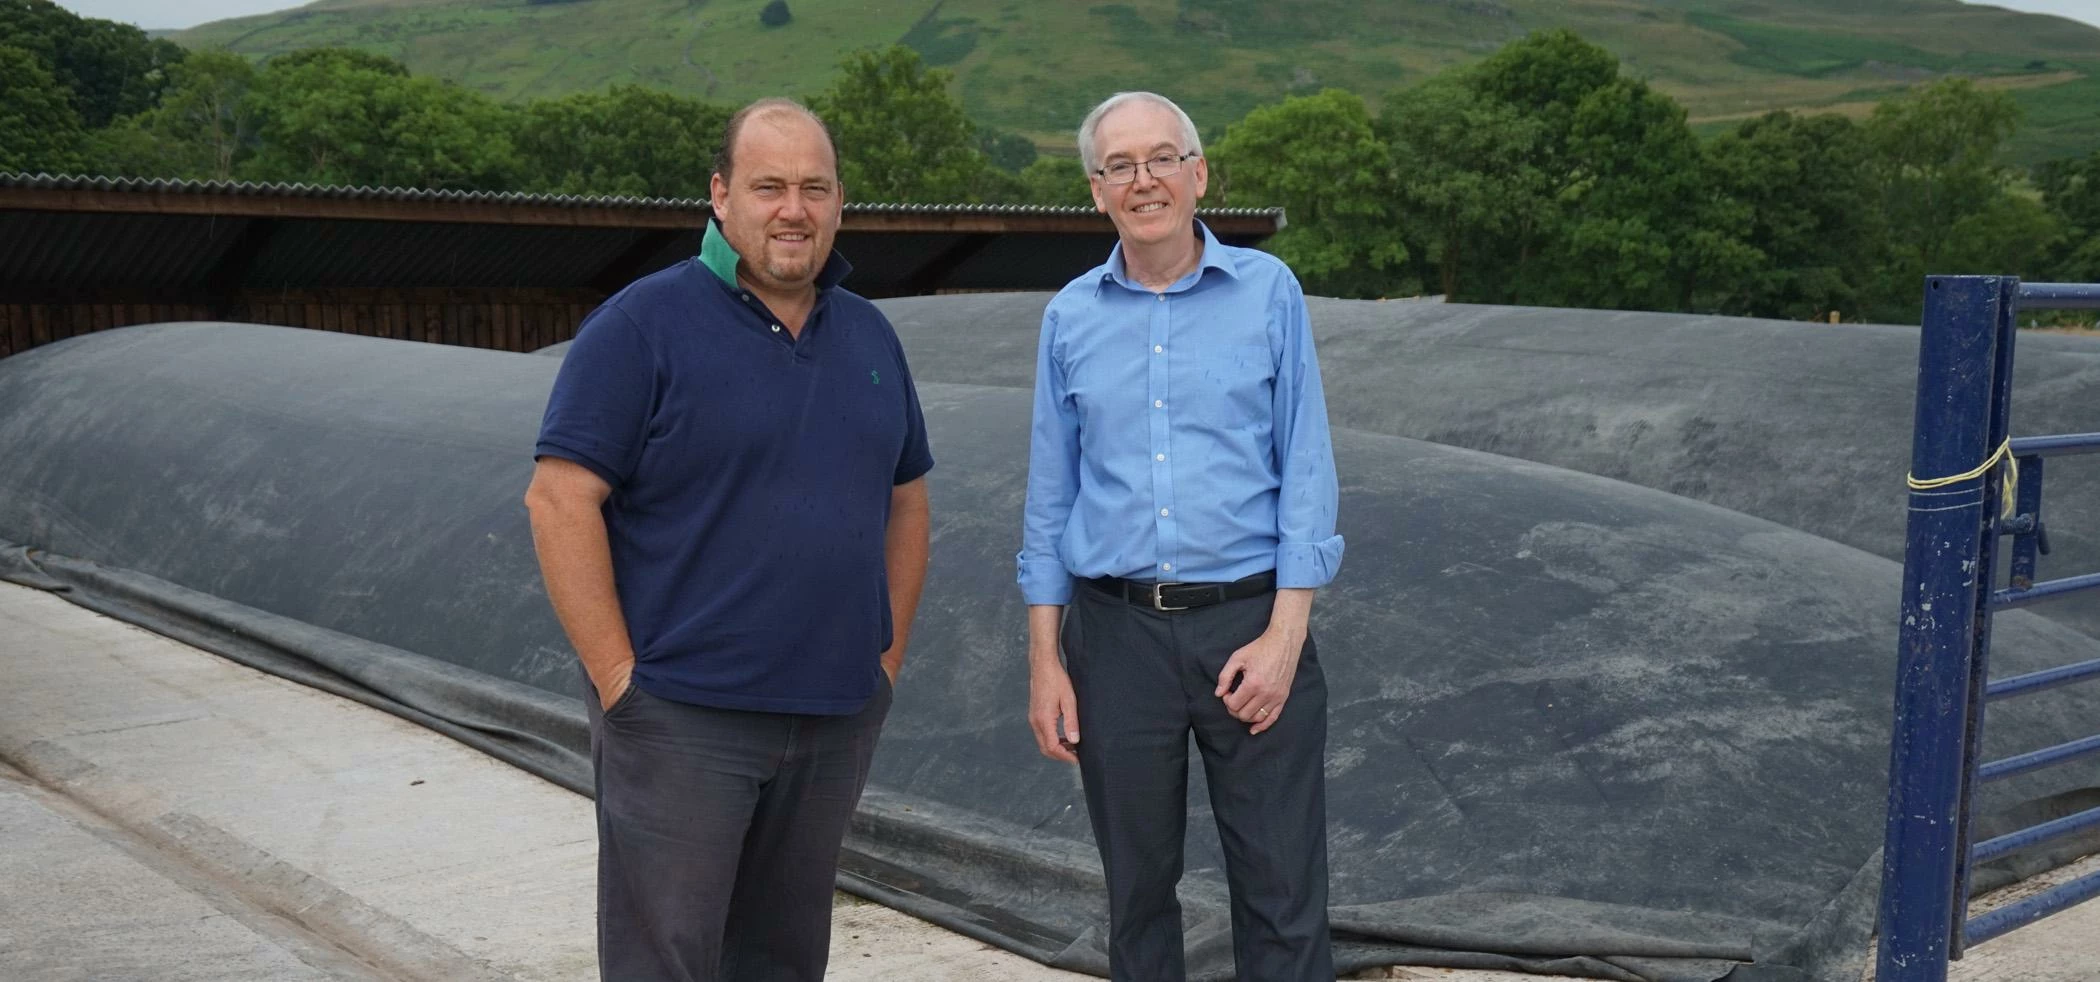 Brian Capstick (left) and Shaun Atherton in front of the dry anaerobic digestion system